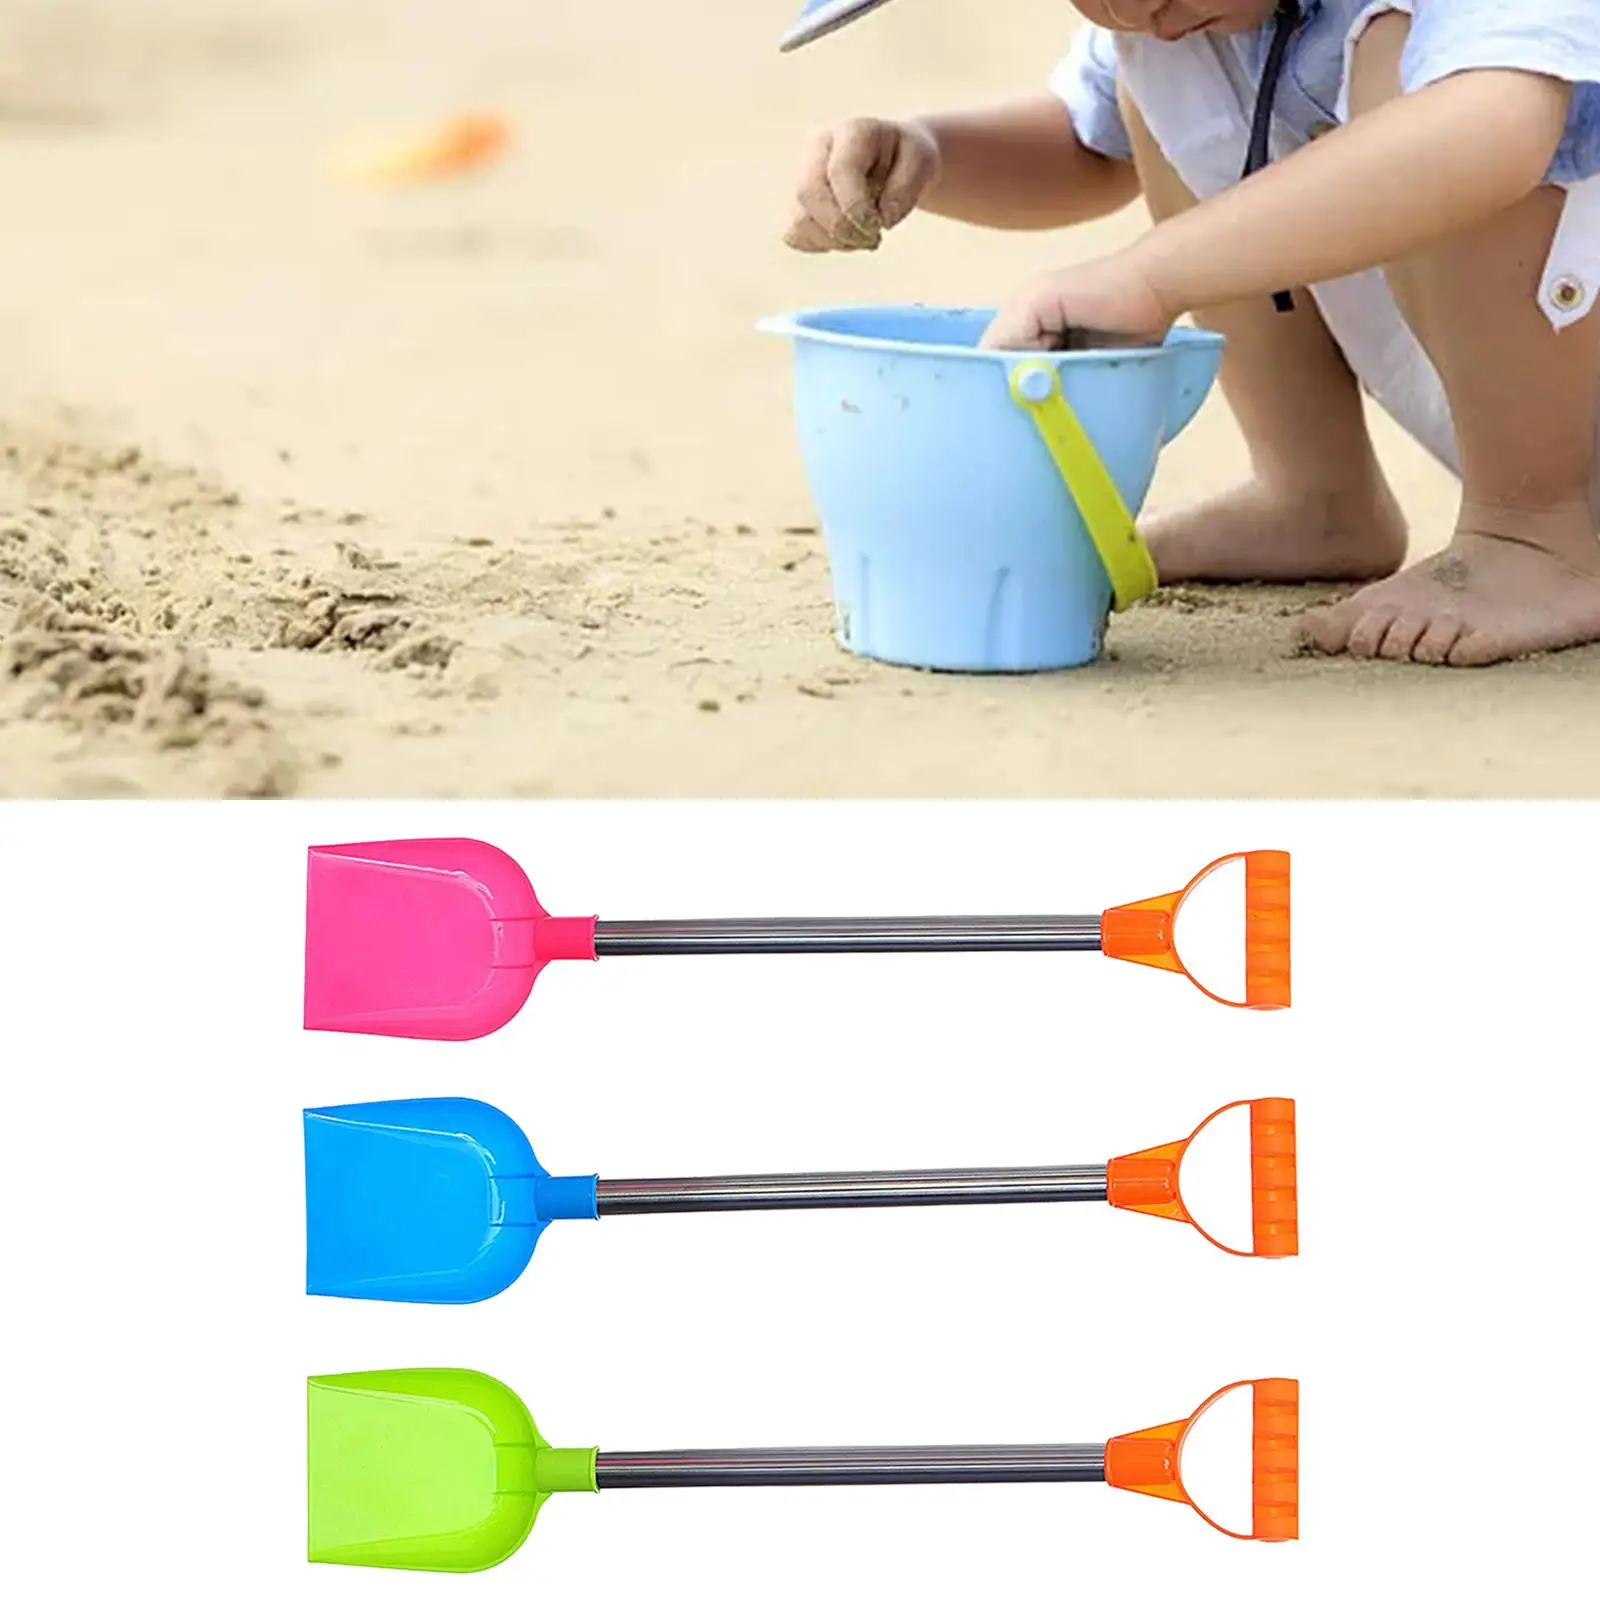 3 Pieces Child Beach Toys Durable Garden Toy Outdoor Toy for Birthday Gift Outdoor Indoor